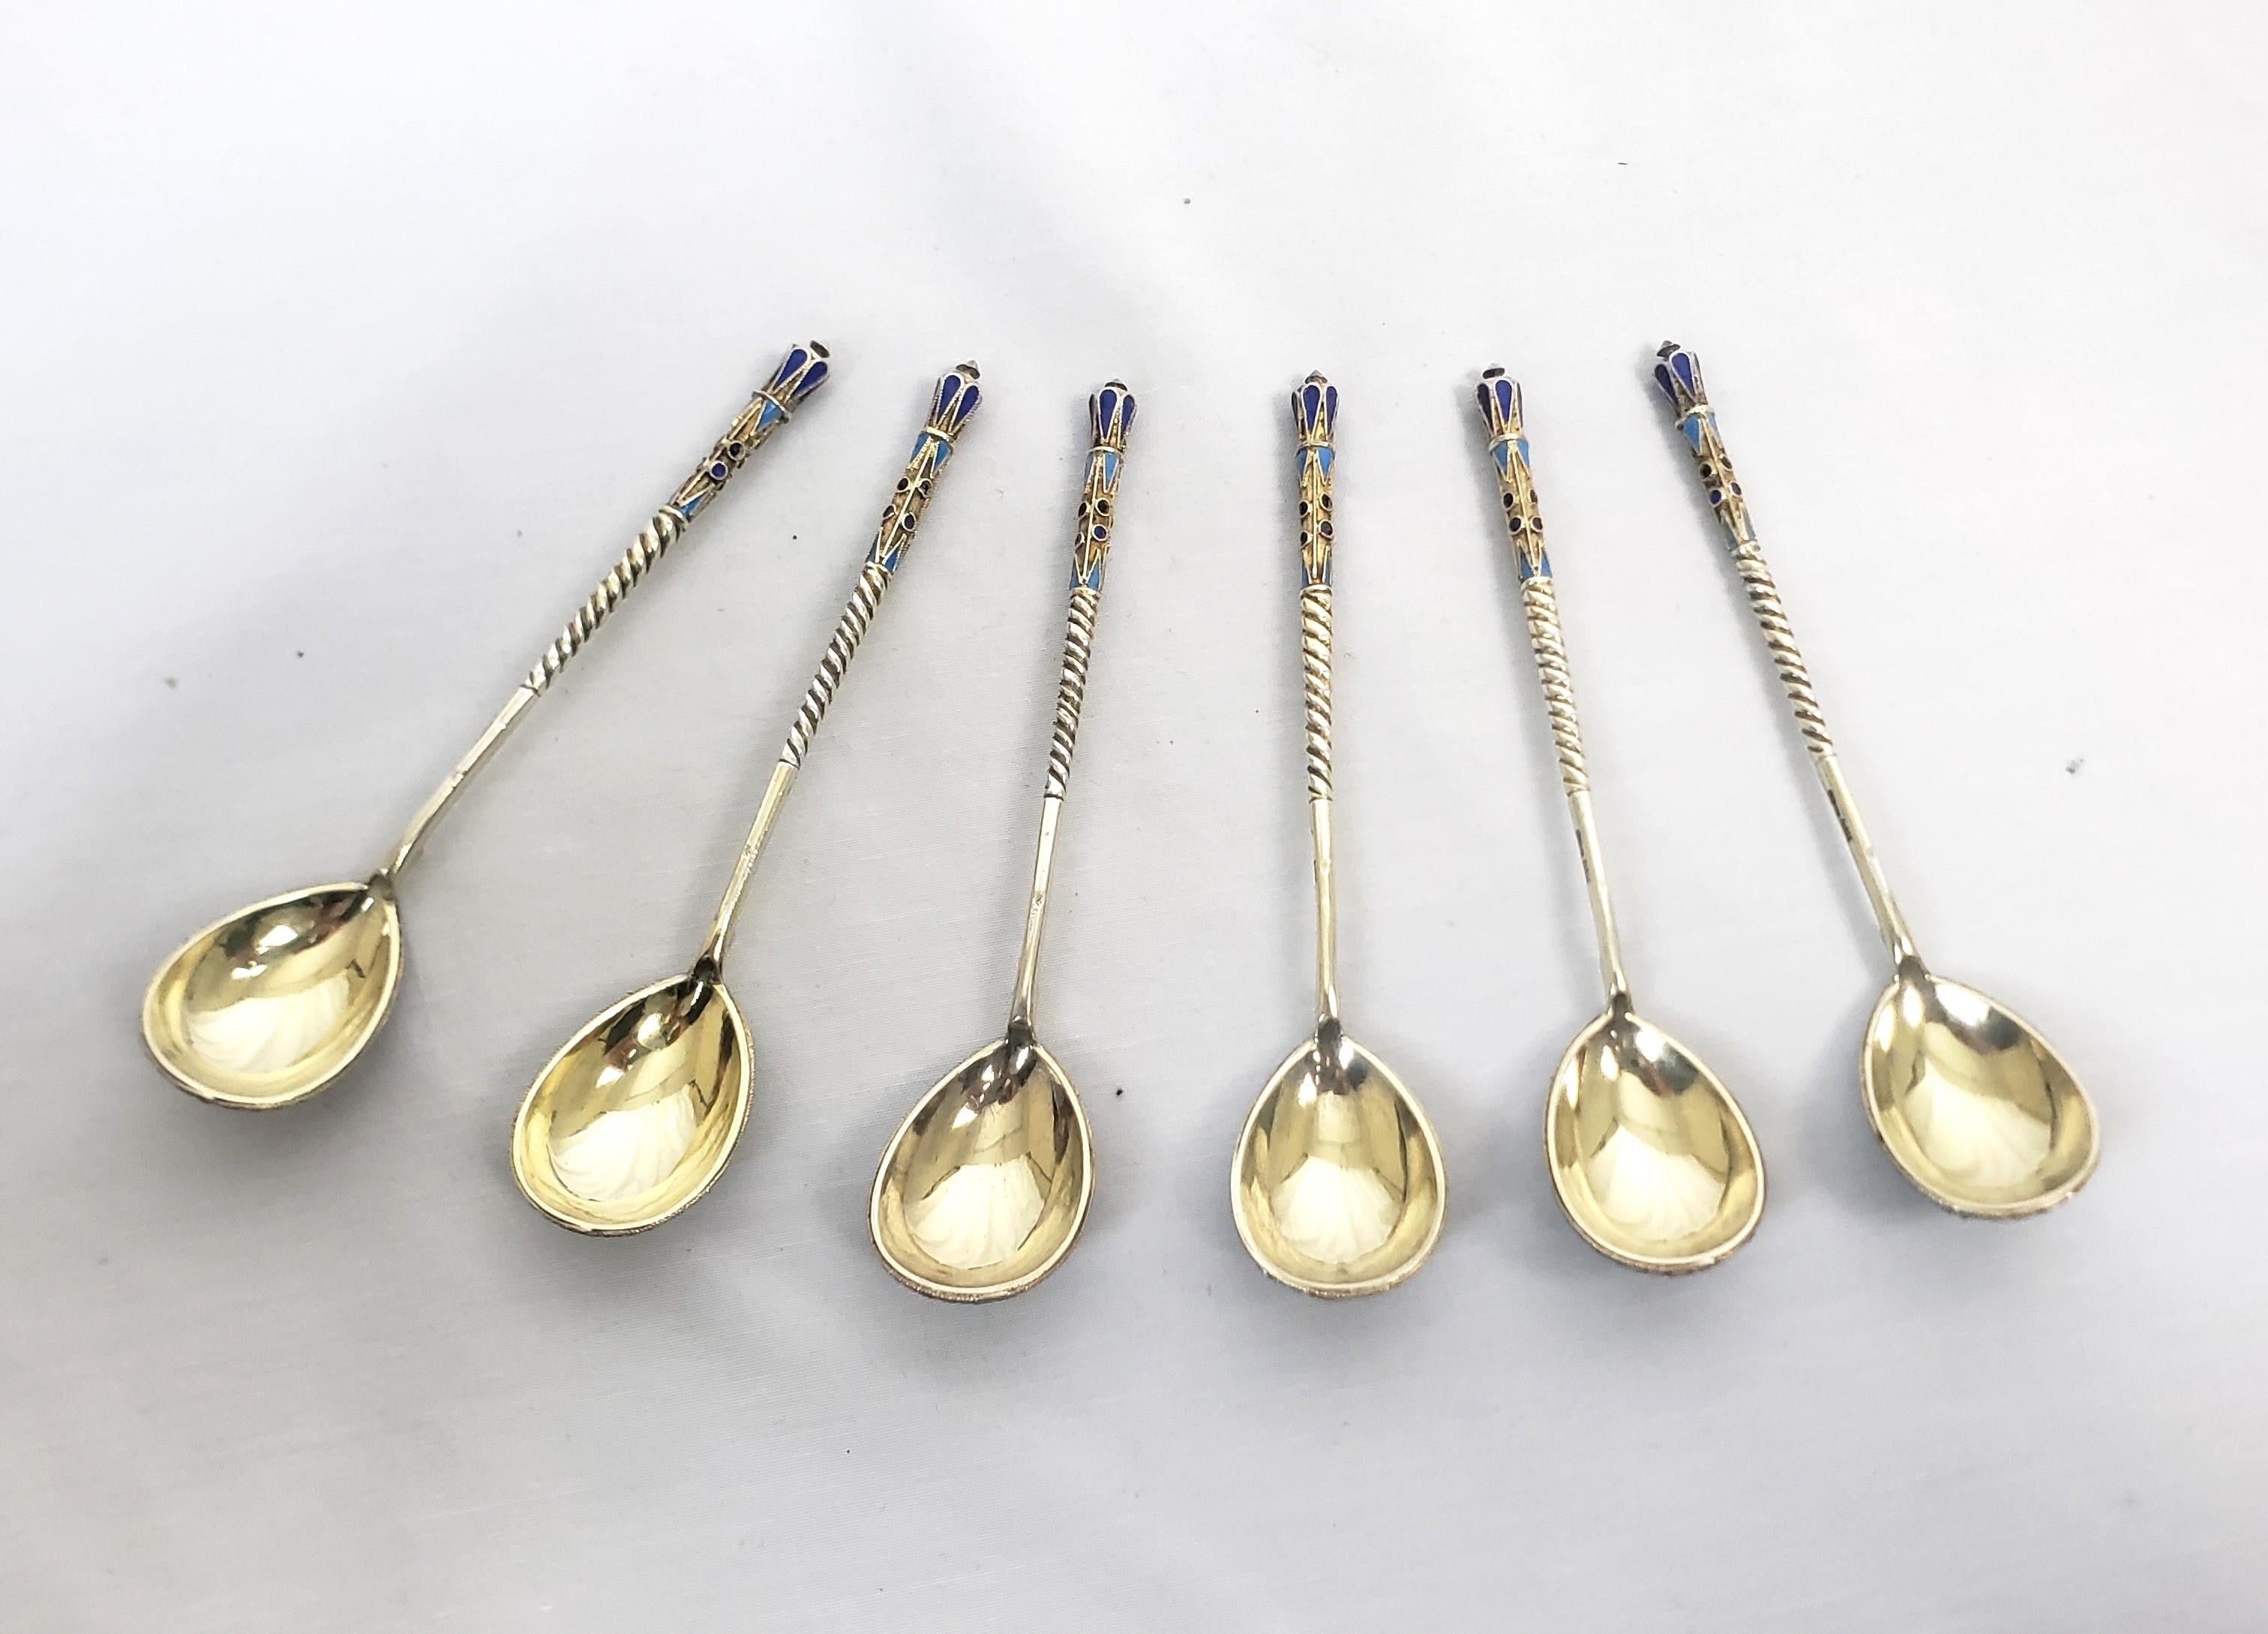 Enameled Antique Russian Silver & Enamel Spoon Set with Ornate Floral Motif For Sale